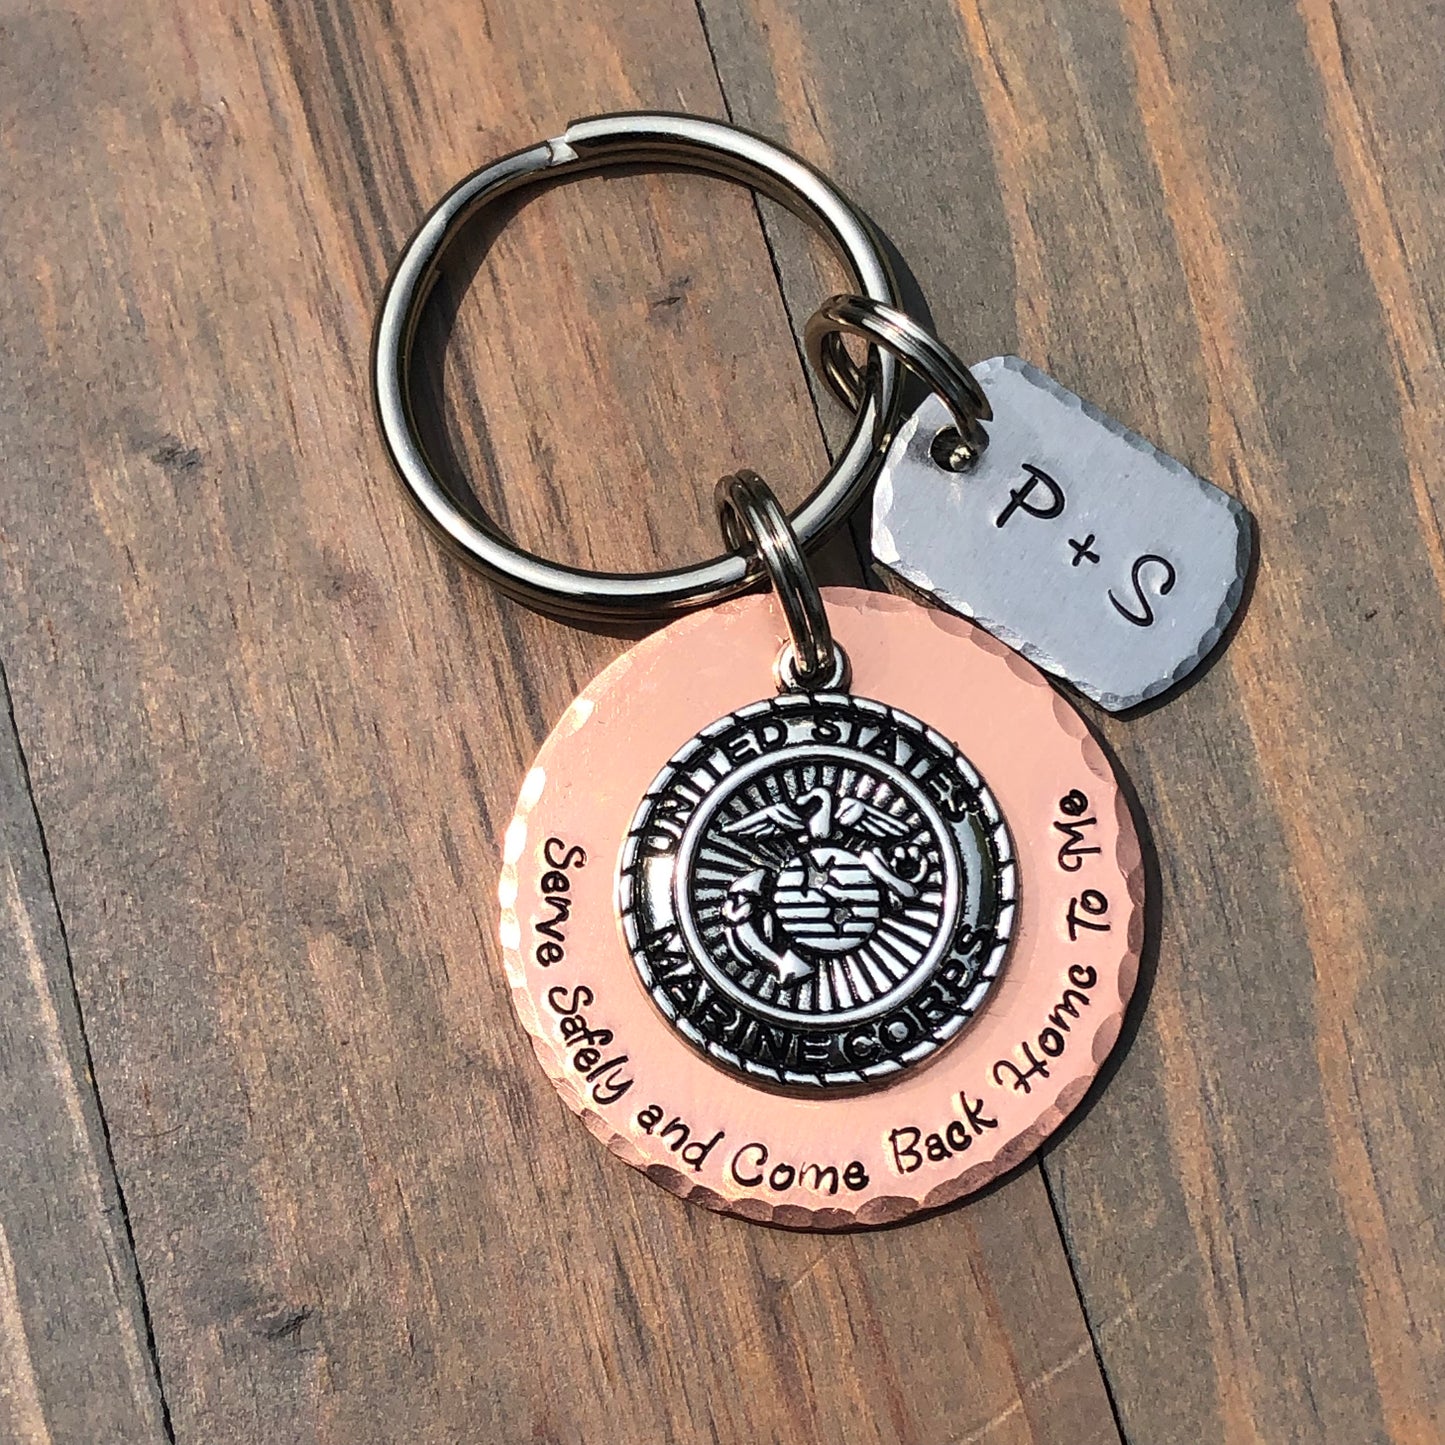 Serve Safely & Come Back Home to Me, Personalized Marines Keychain, Deployment Gift,Boyfriend, Girlfriend,Husband, Wife, Long Distance Love